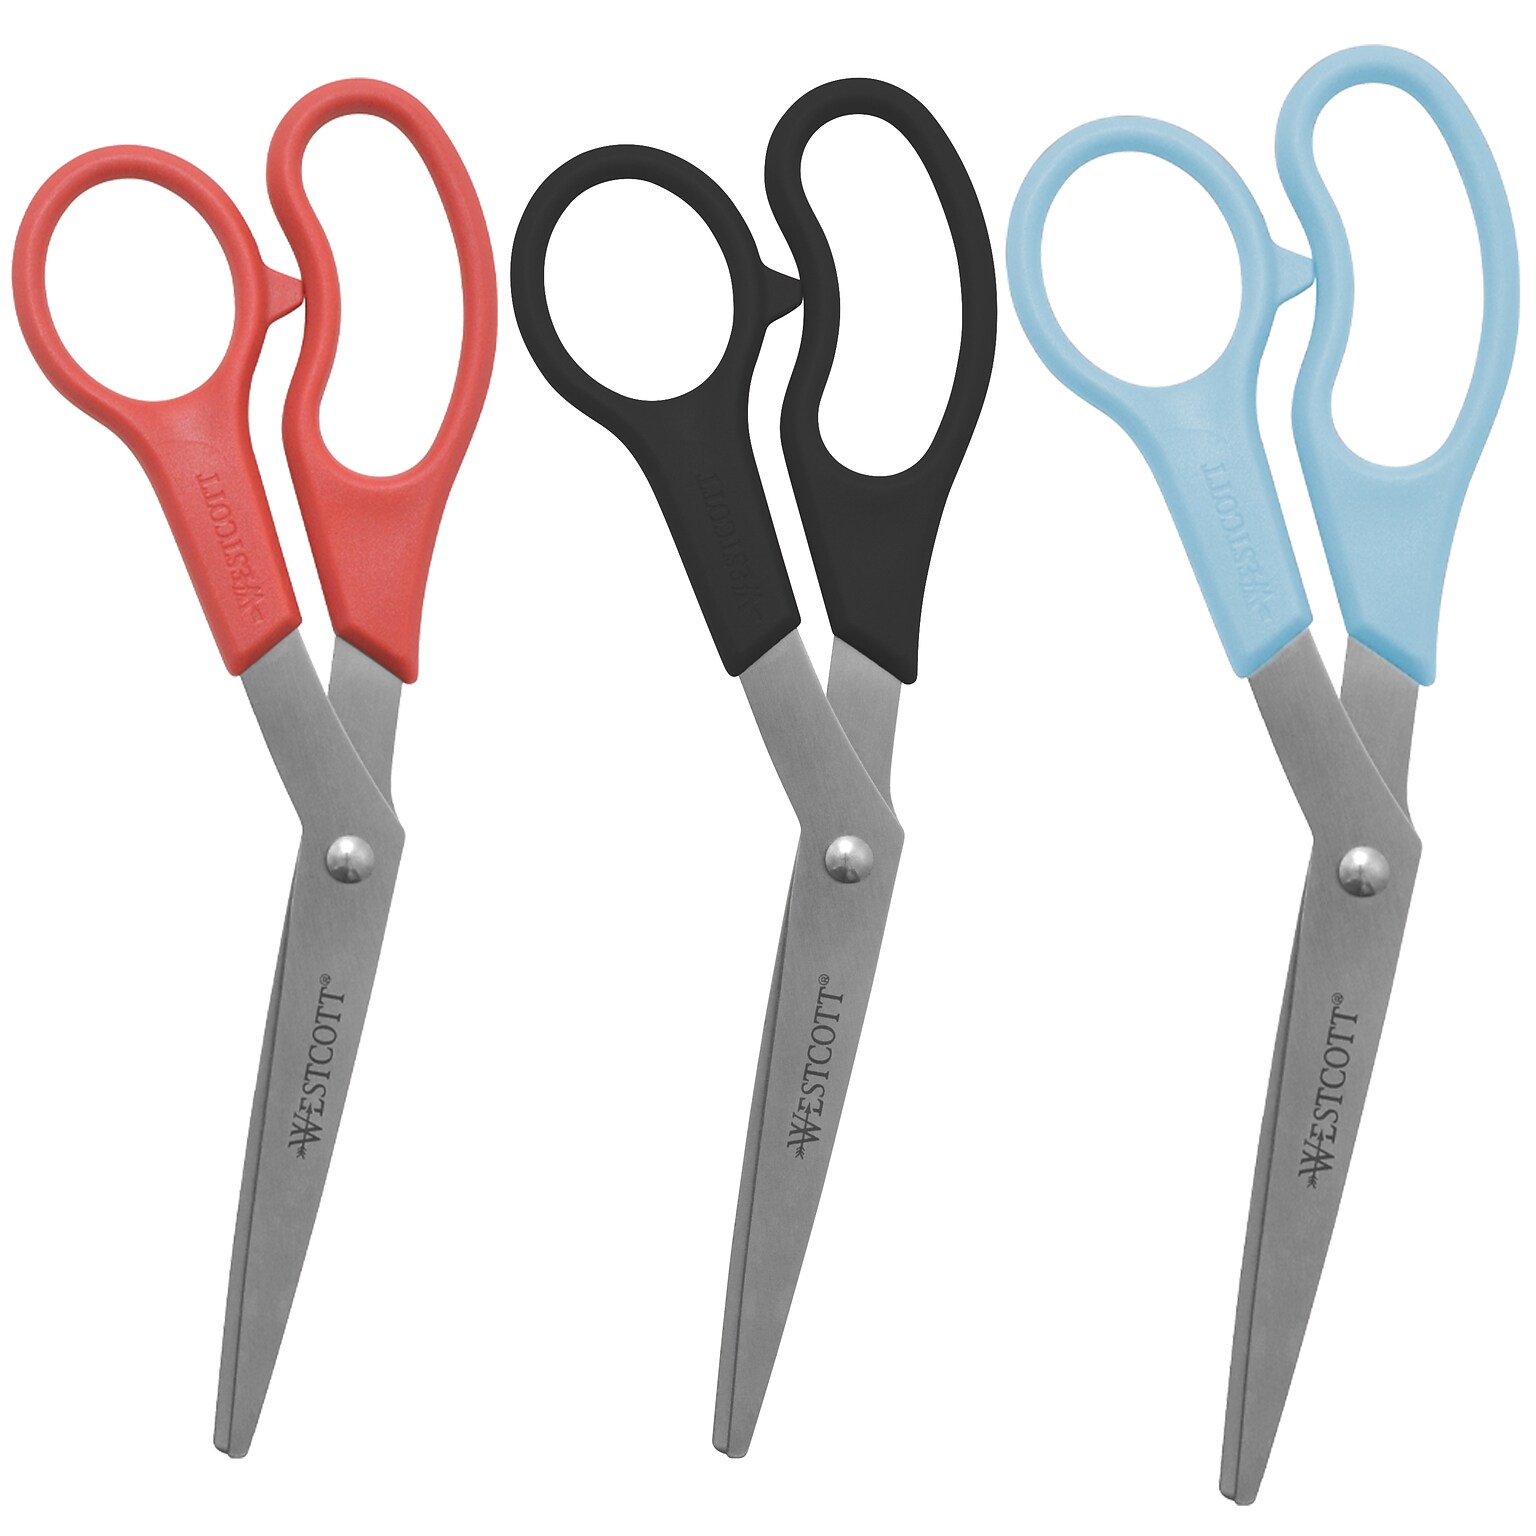 Westcott All Purpose 8 Stainless Steel Standard Scissors, Pointed Tip, Assorted Colors, 3/Pack (13023/13403)